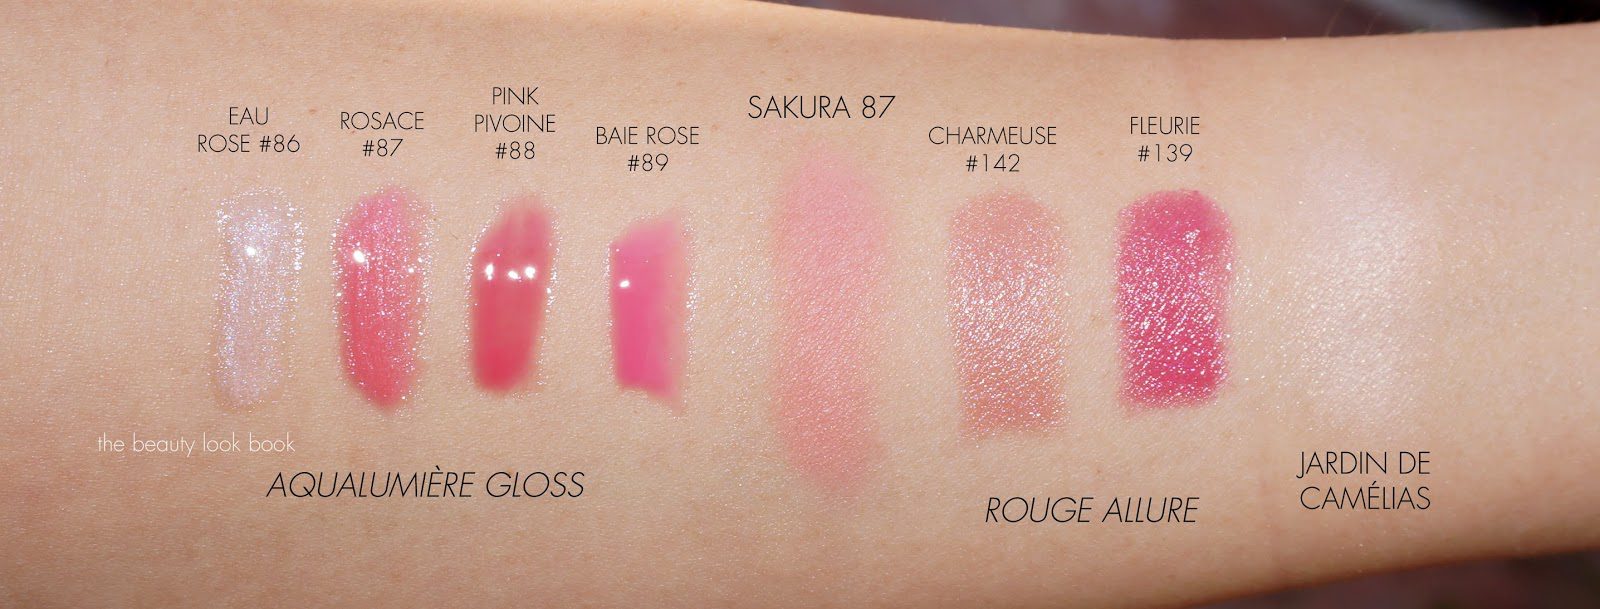 Lipgloss Archives - Page 3 of 31 - The Beauty Look Book